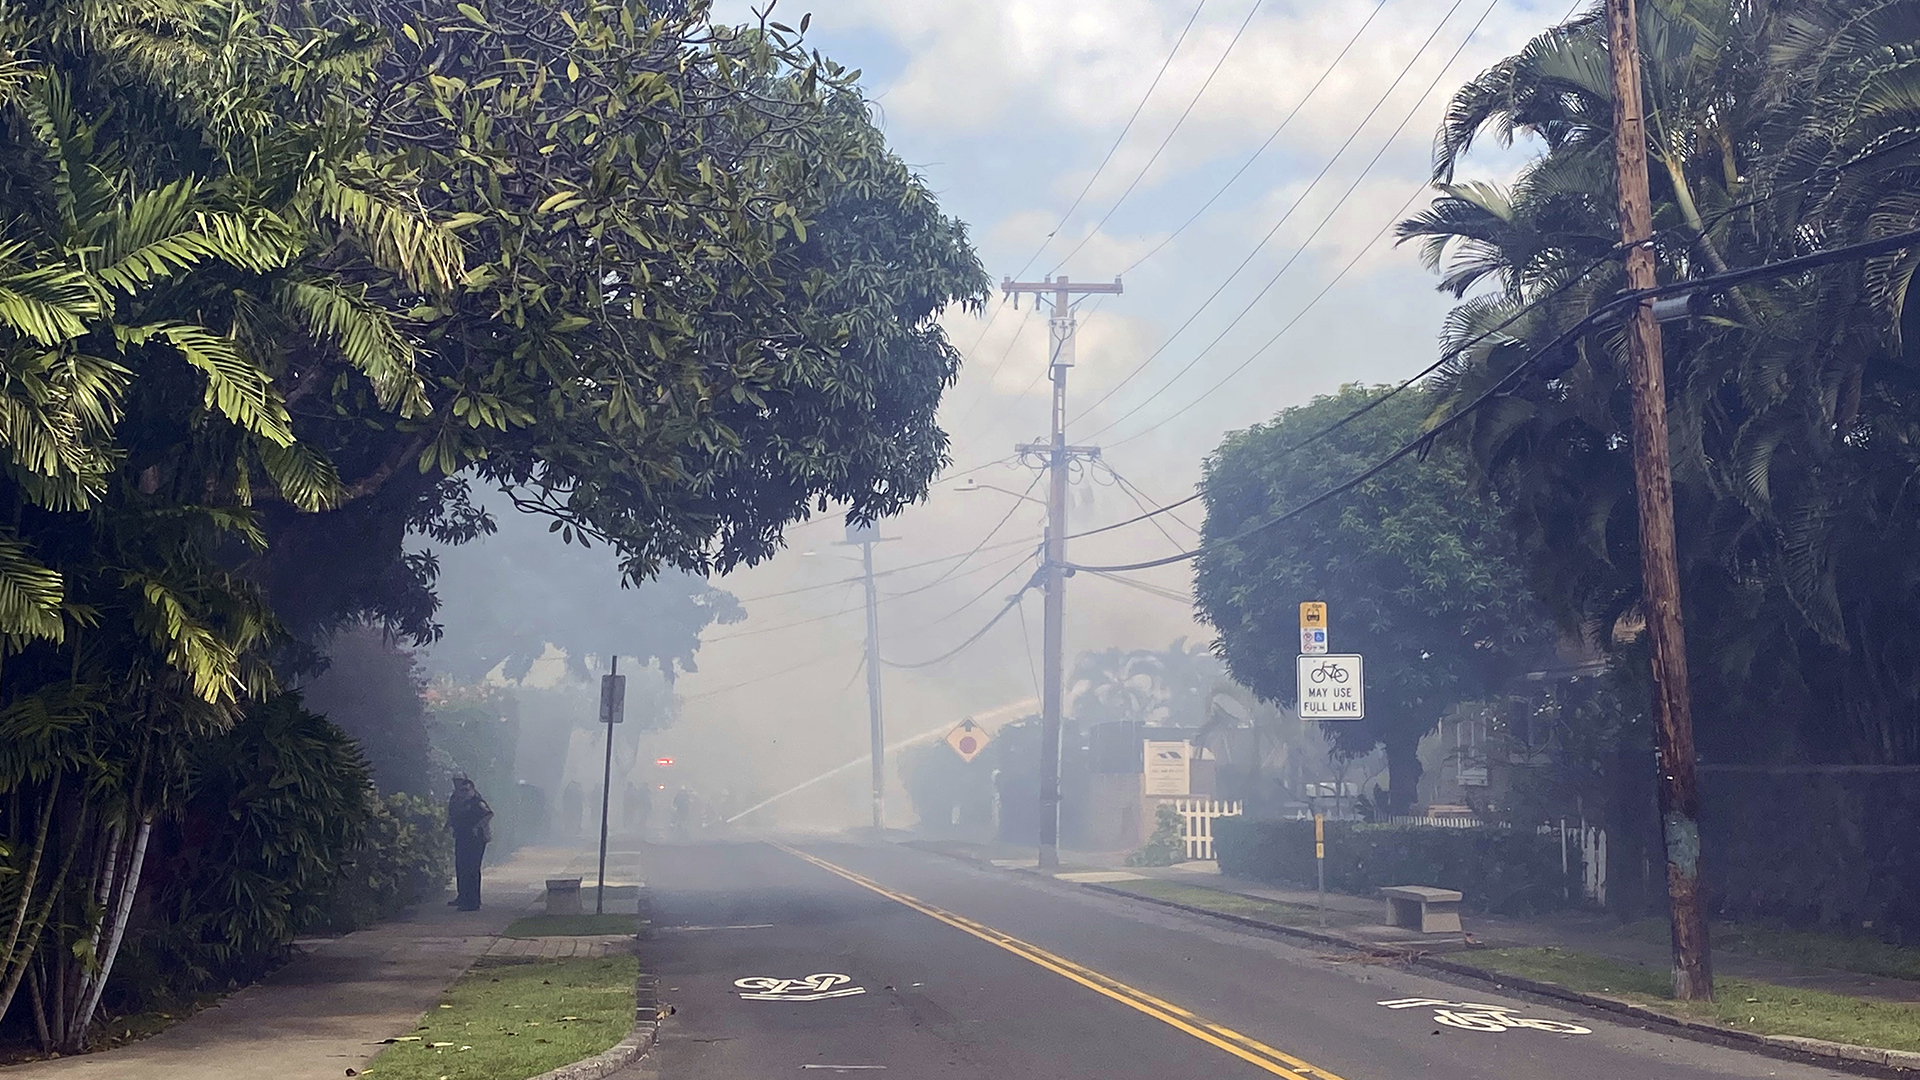 Two police killed in Hawaii shooting, multiple homes up in flames - CGTN